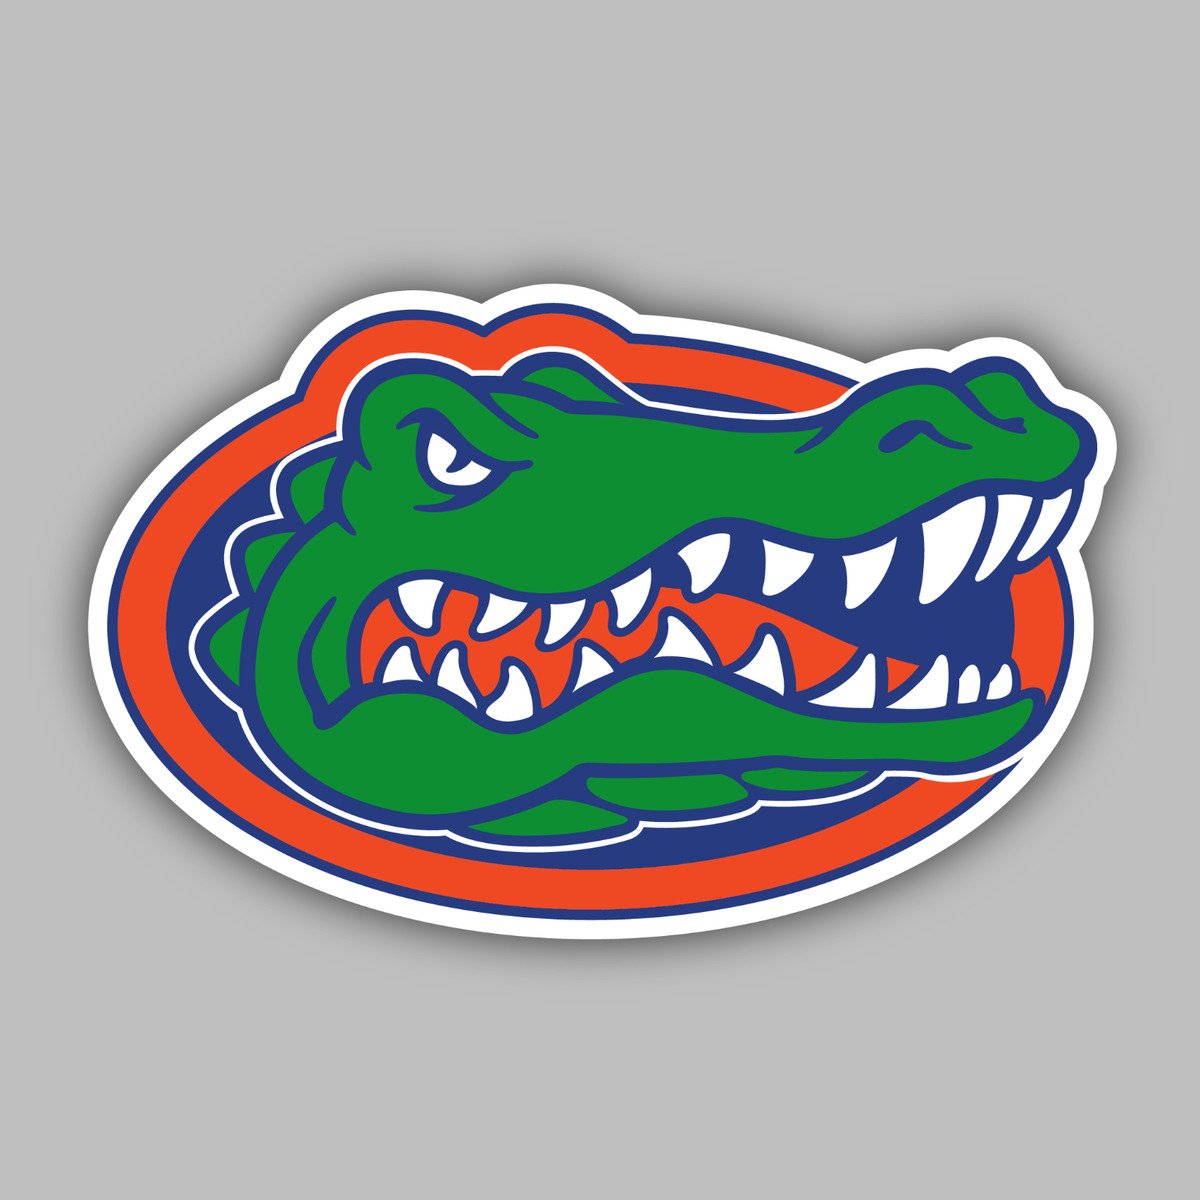 After a great conversation with @CoachGChatman I would like to announce another offer to the university of Florida 'like a Florida gator'